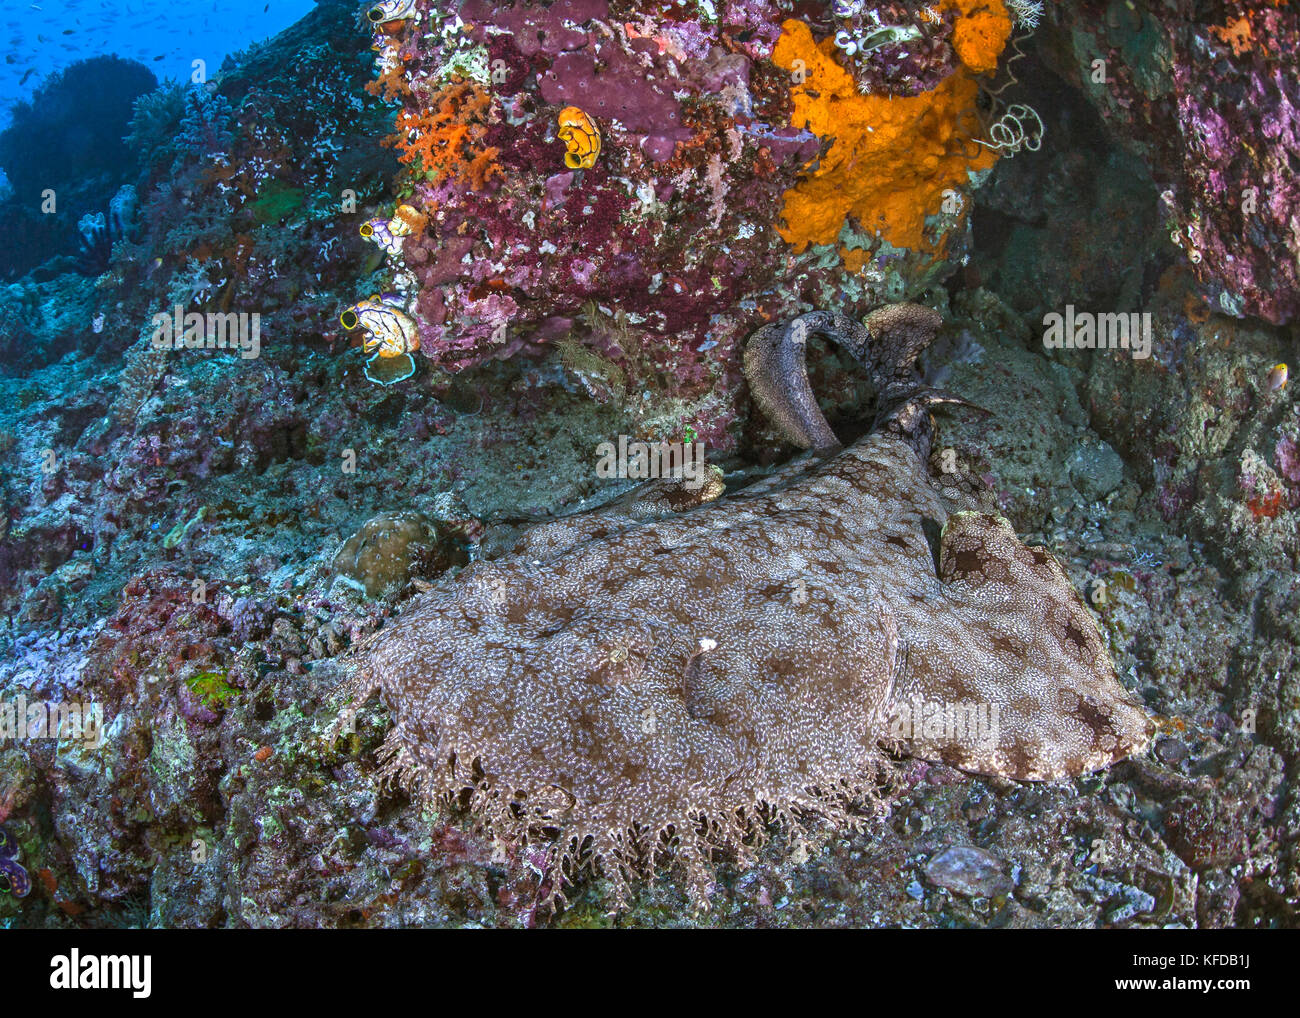 Close focus, wide-angle image of a wobbegong shark sleeping under a colorful coral cave. Raja Ampat, Indonesia. Stock Photo